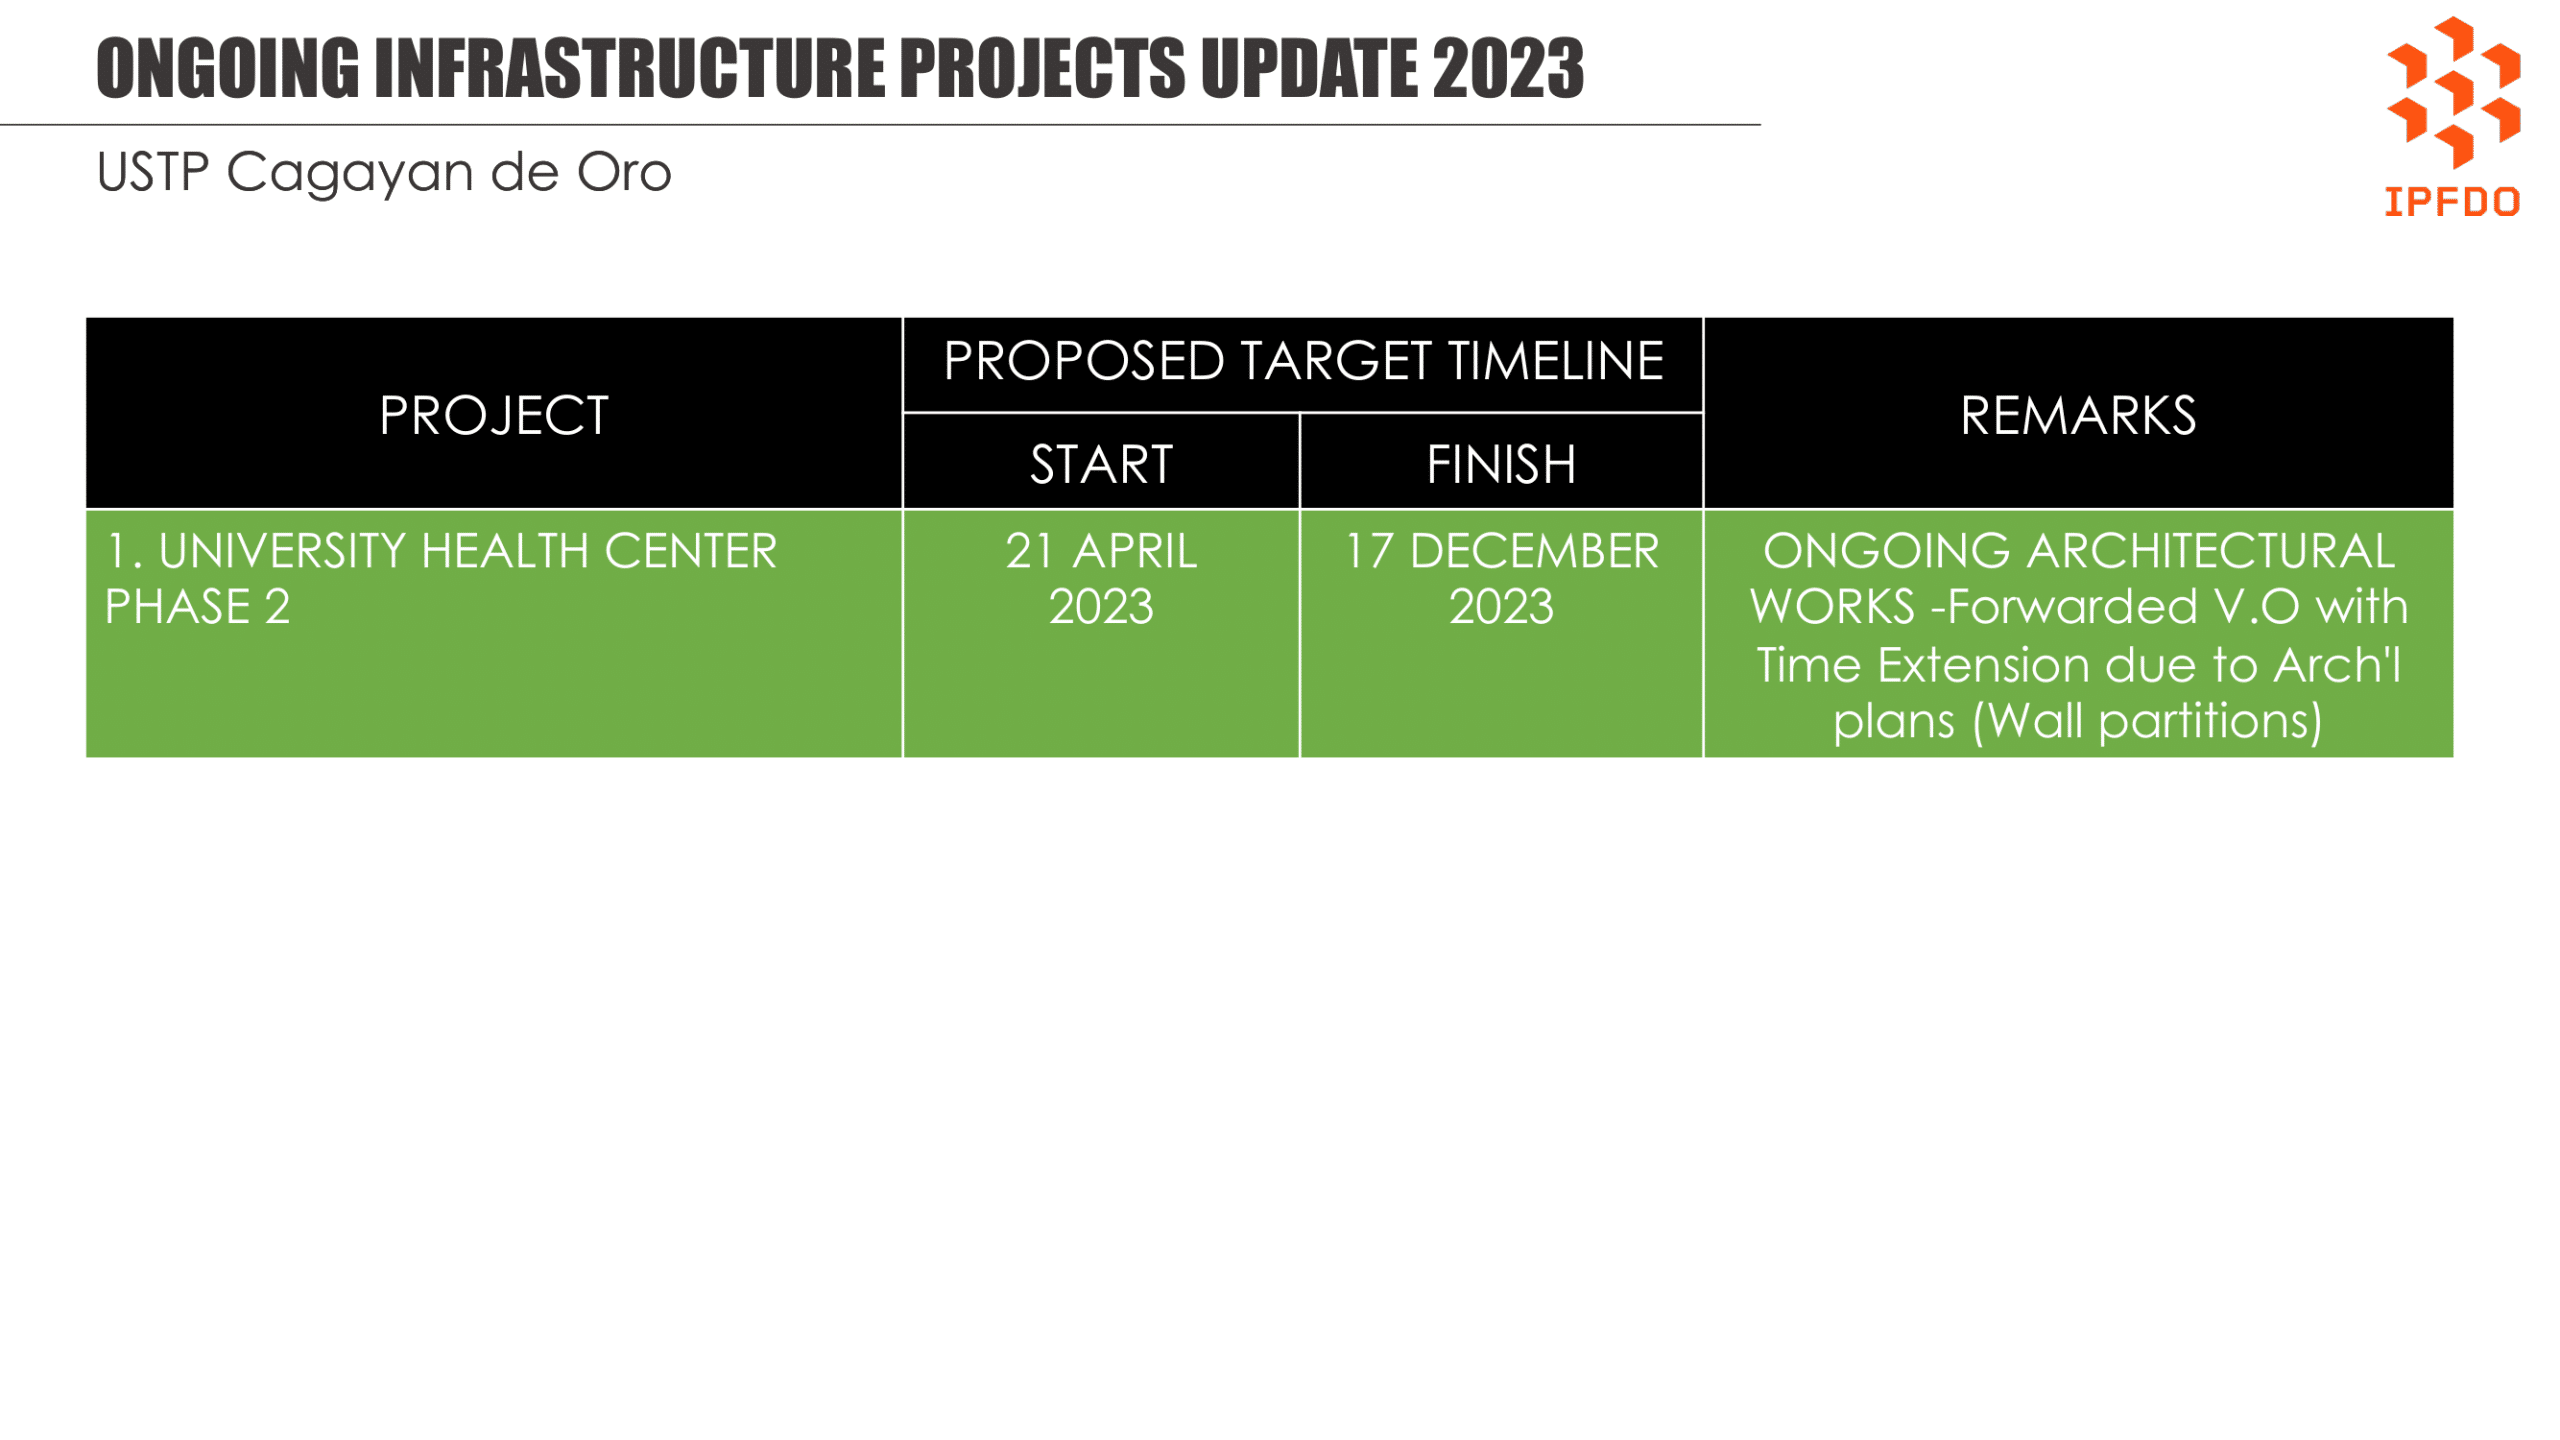 Ongoing Infrastructure Projects Update 2023 - USTP Cagayan de Oro